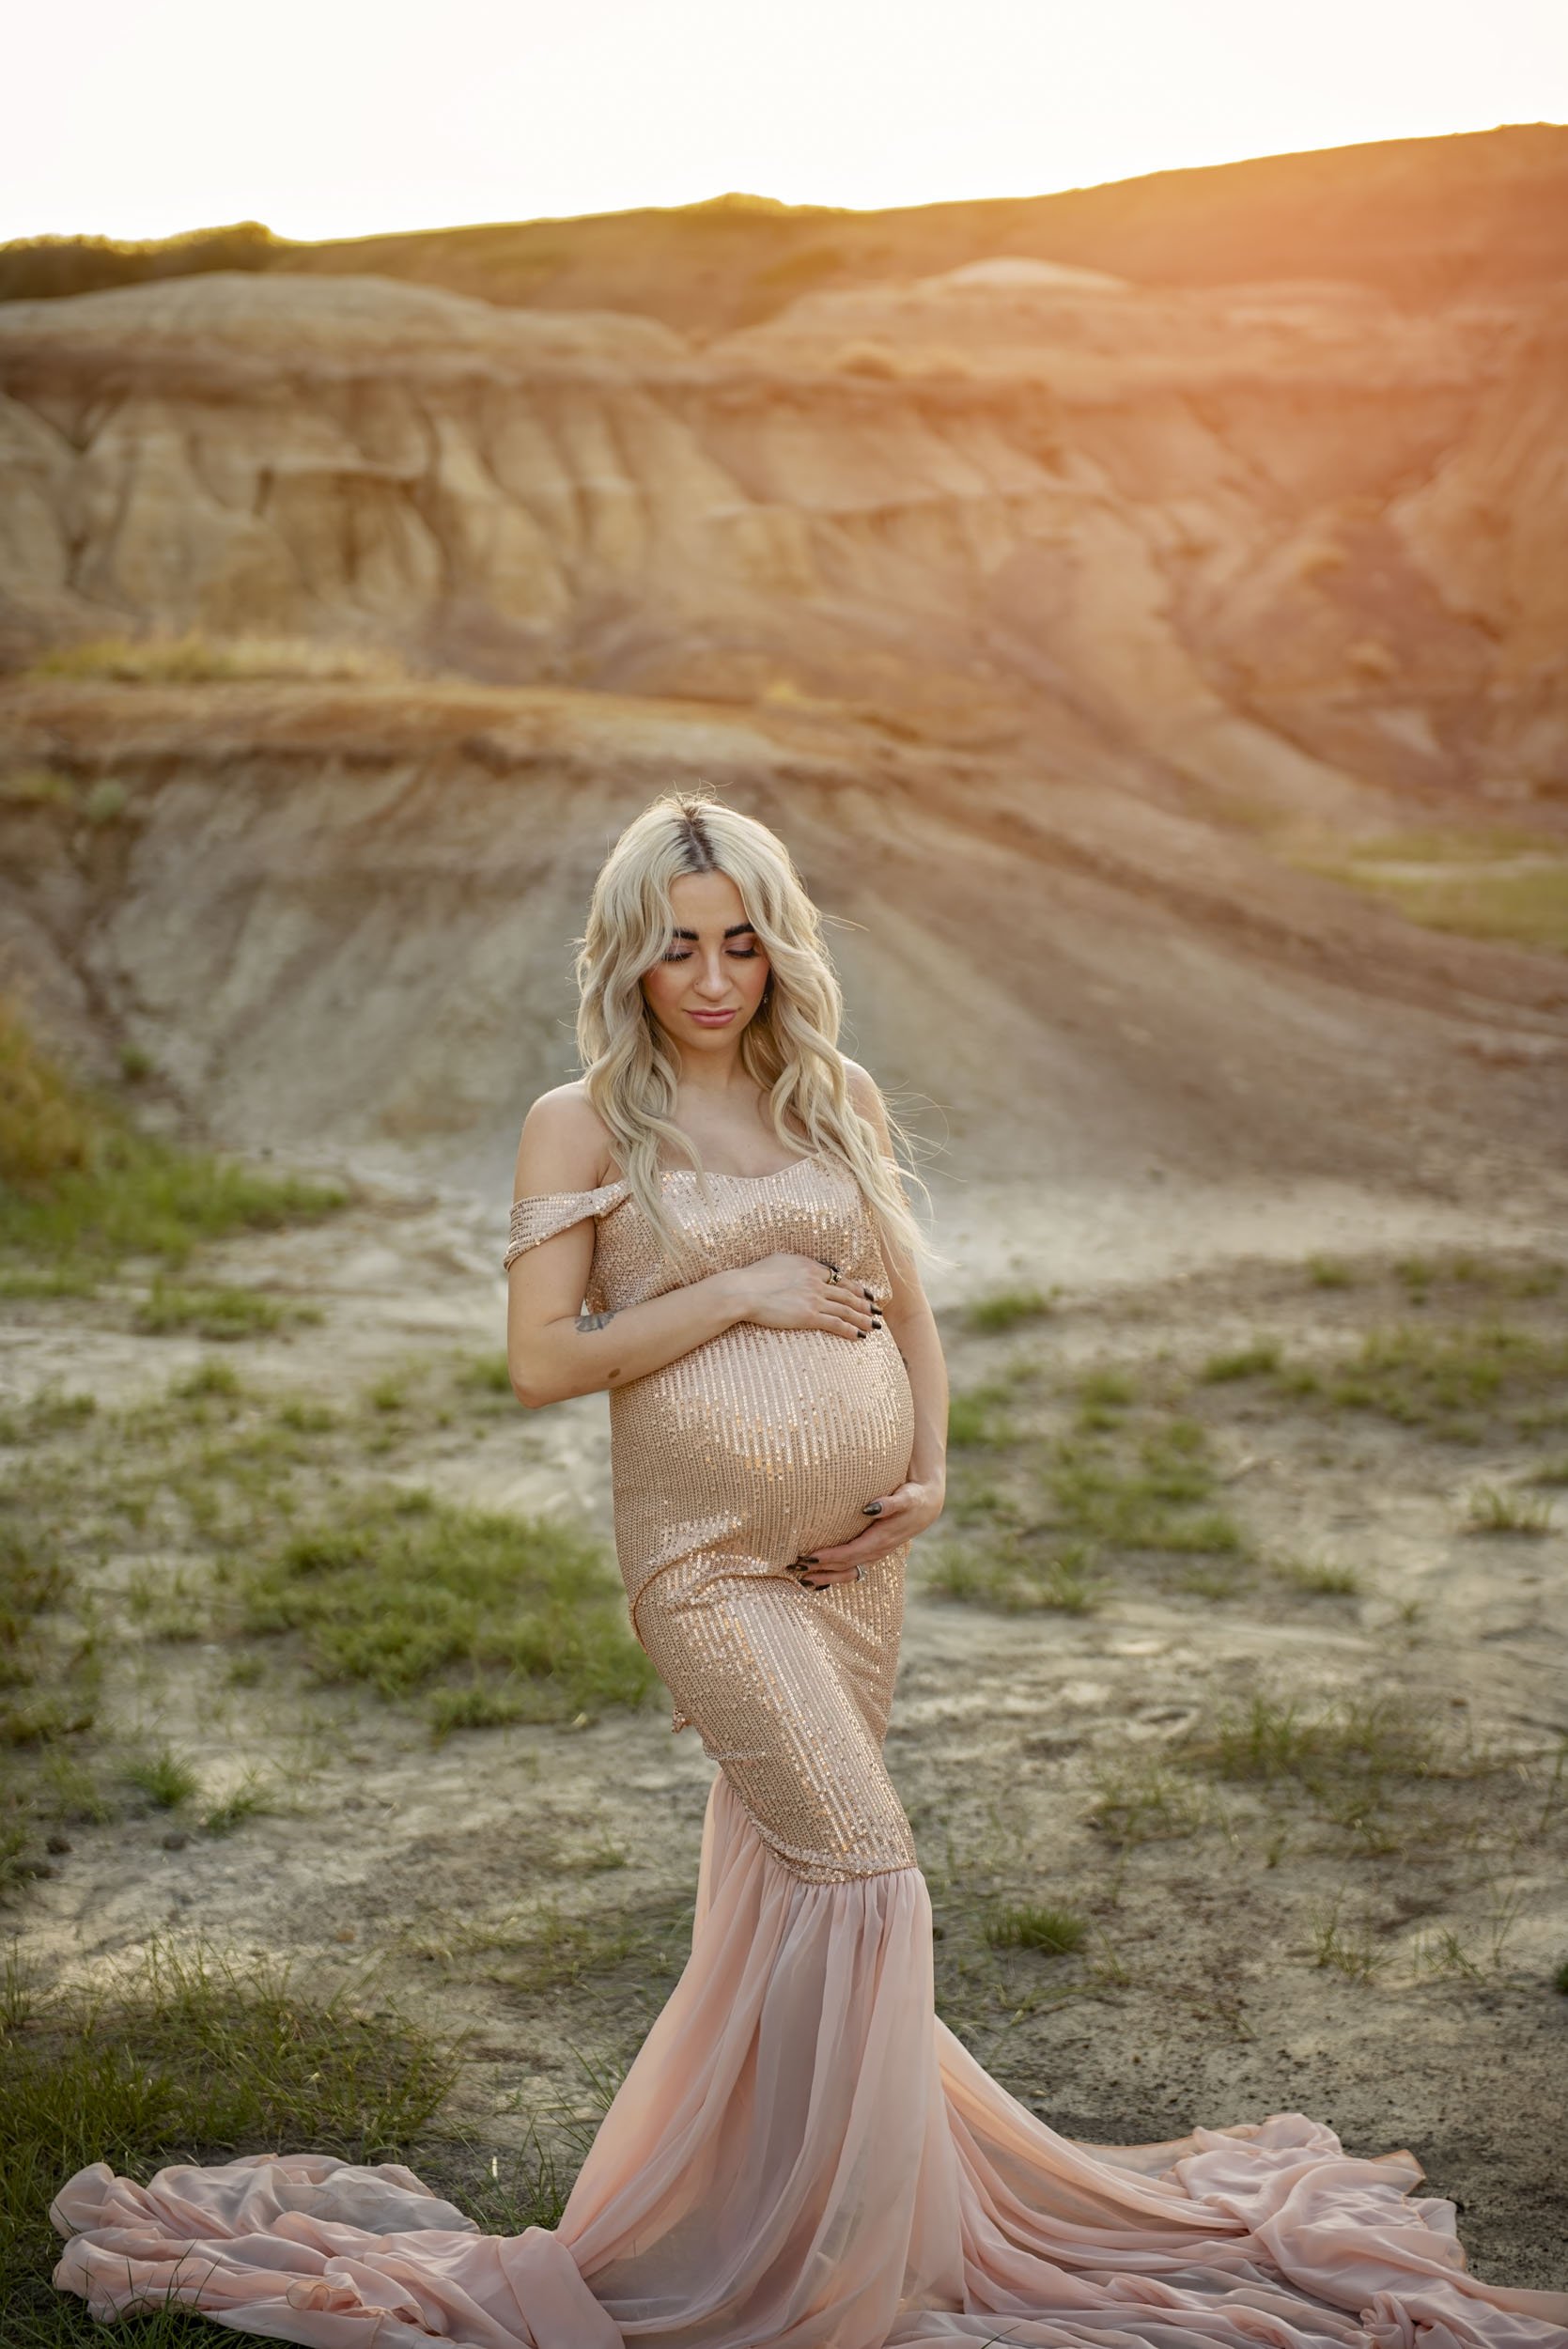 Lace and locket photo Airdrie Calgary Maternity Photographer-30.jpg